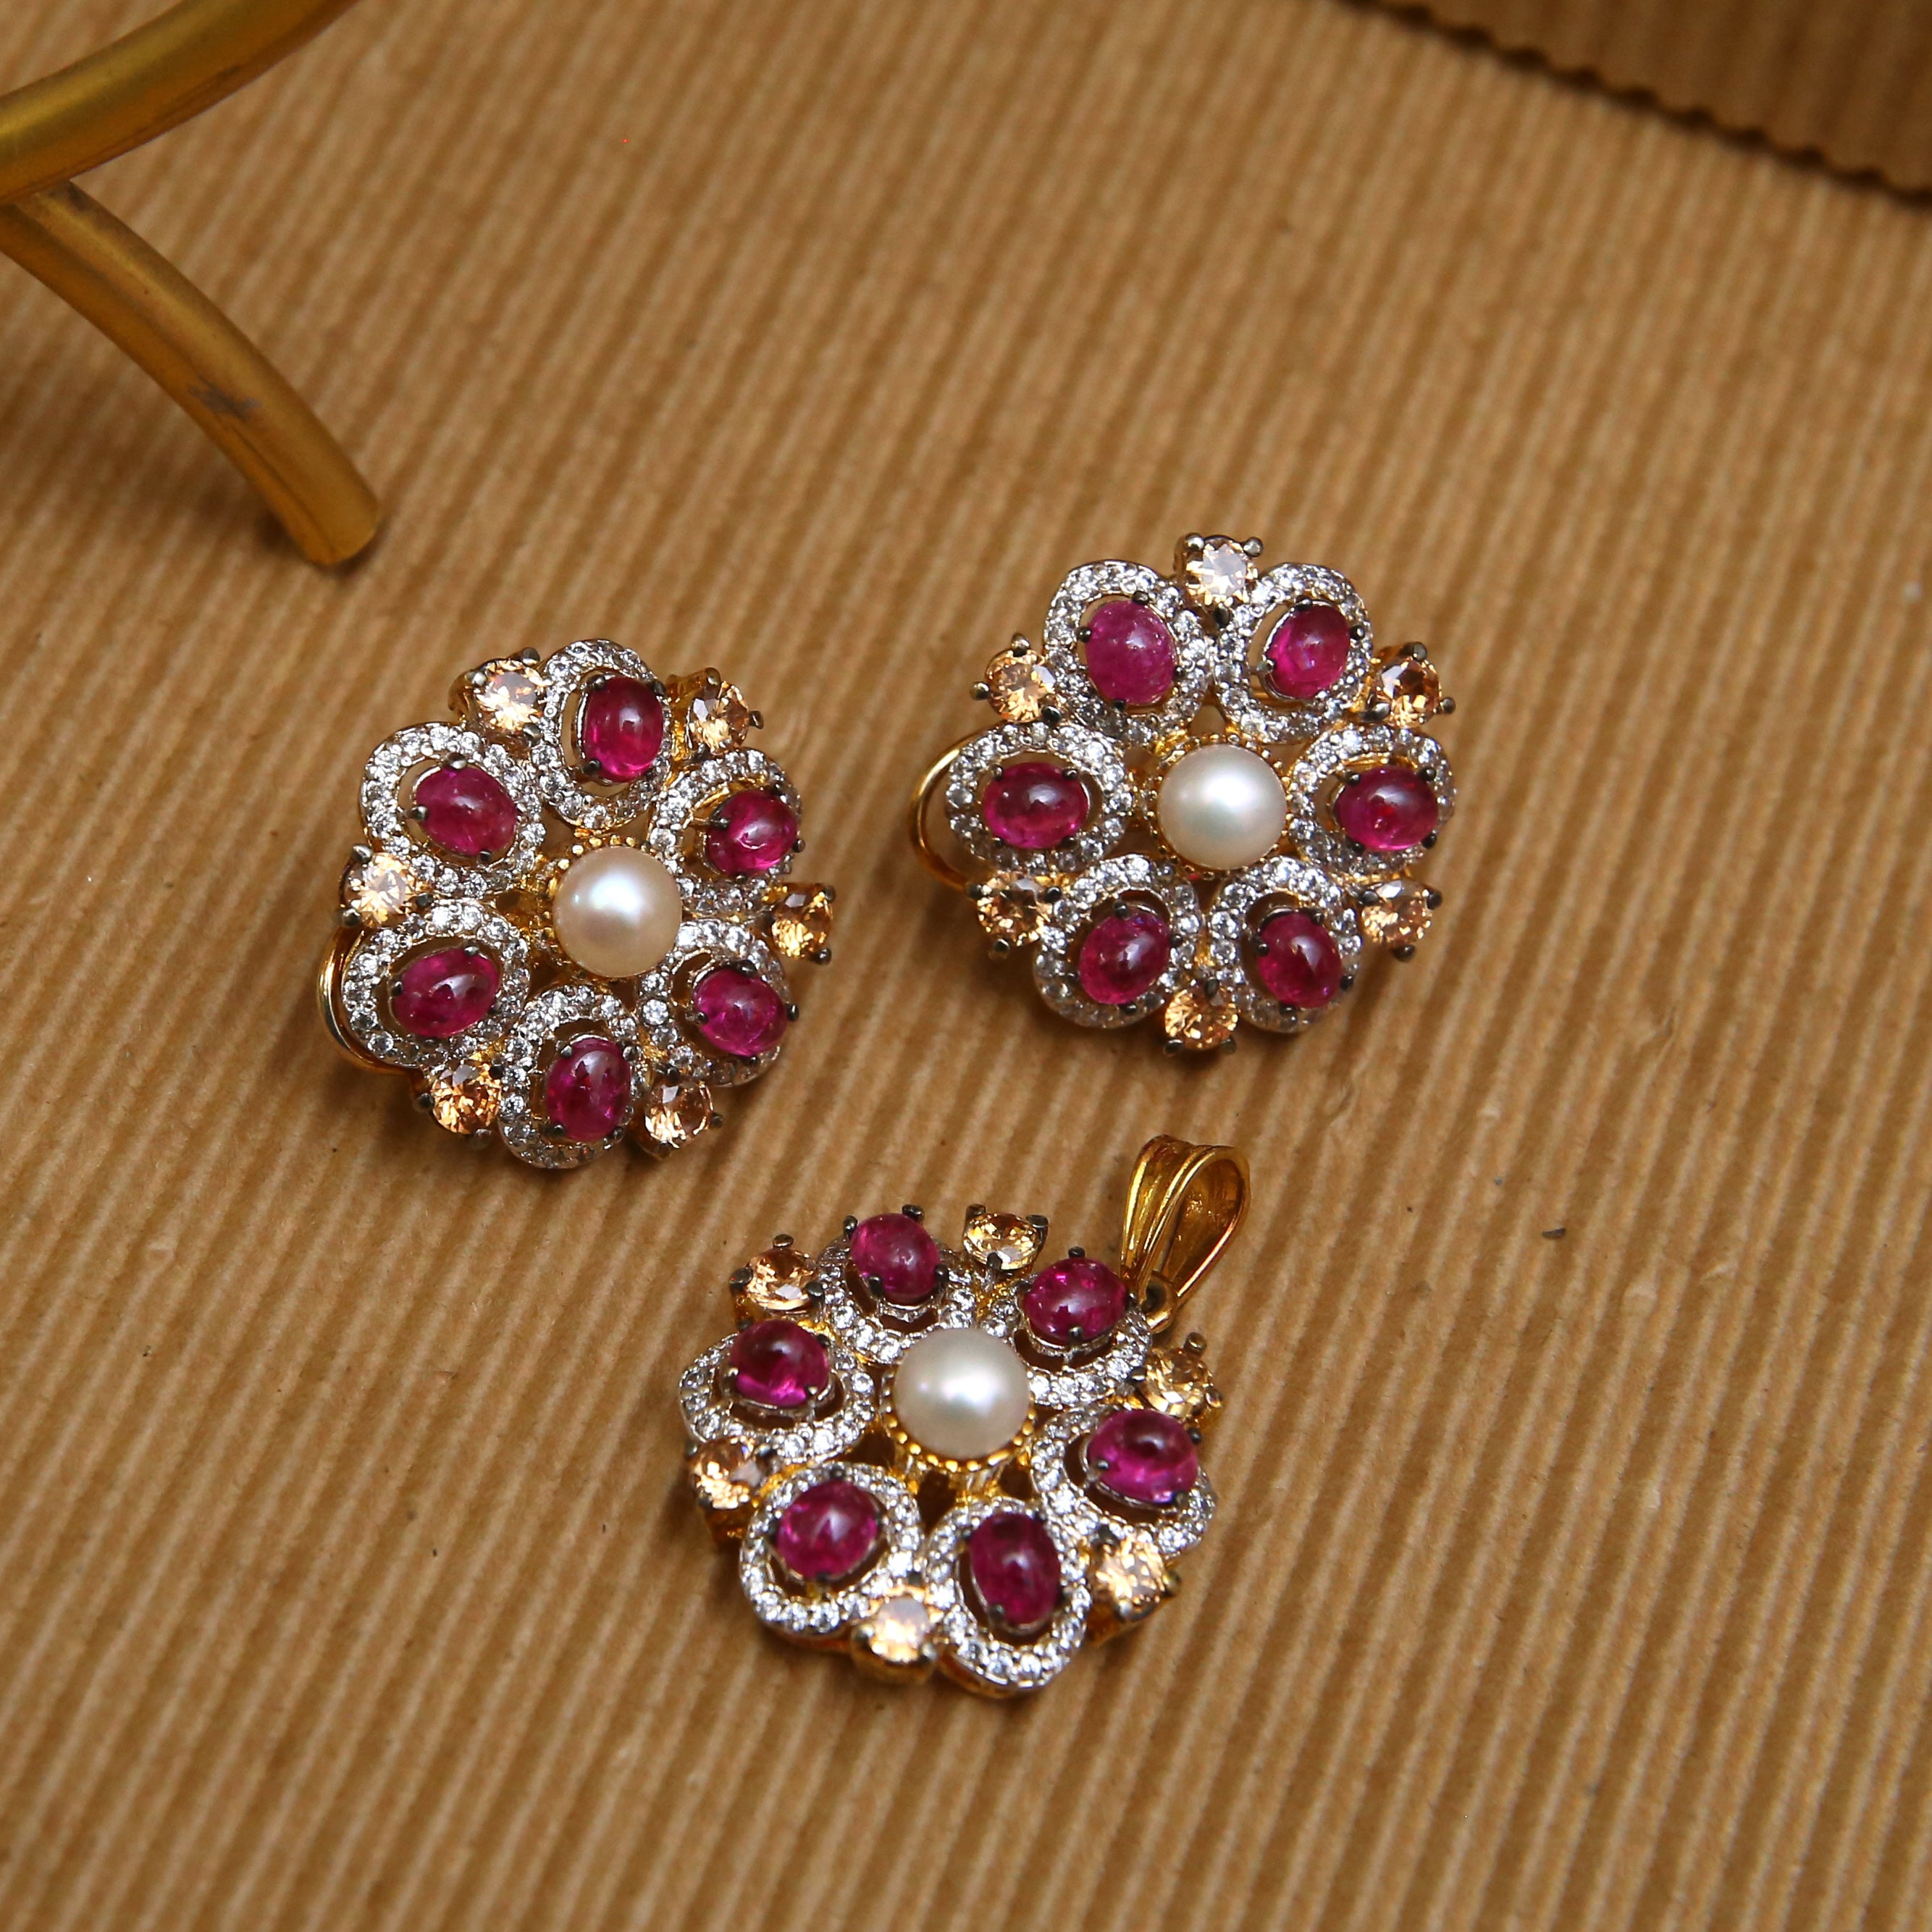 The Flower Tops with Cultured Pearl Centres